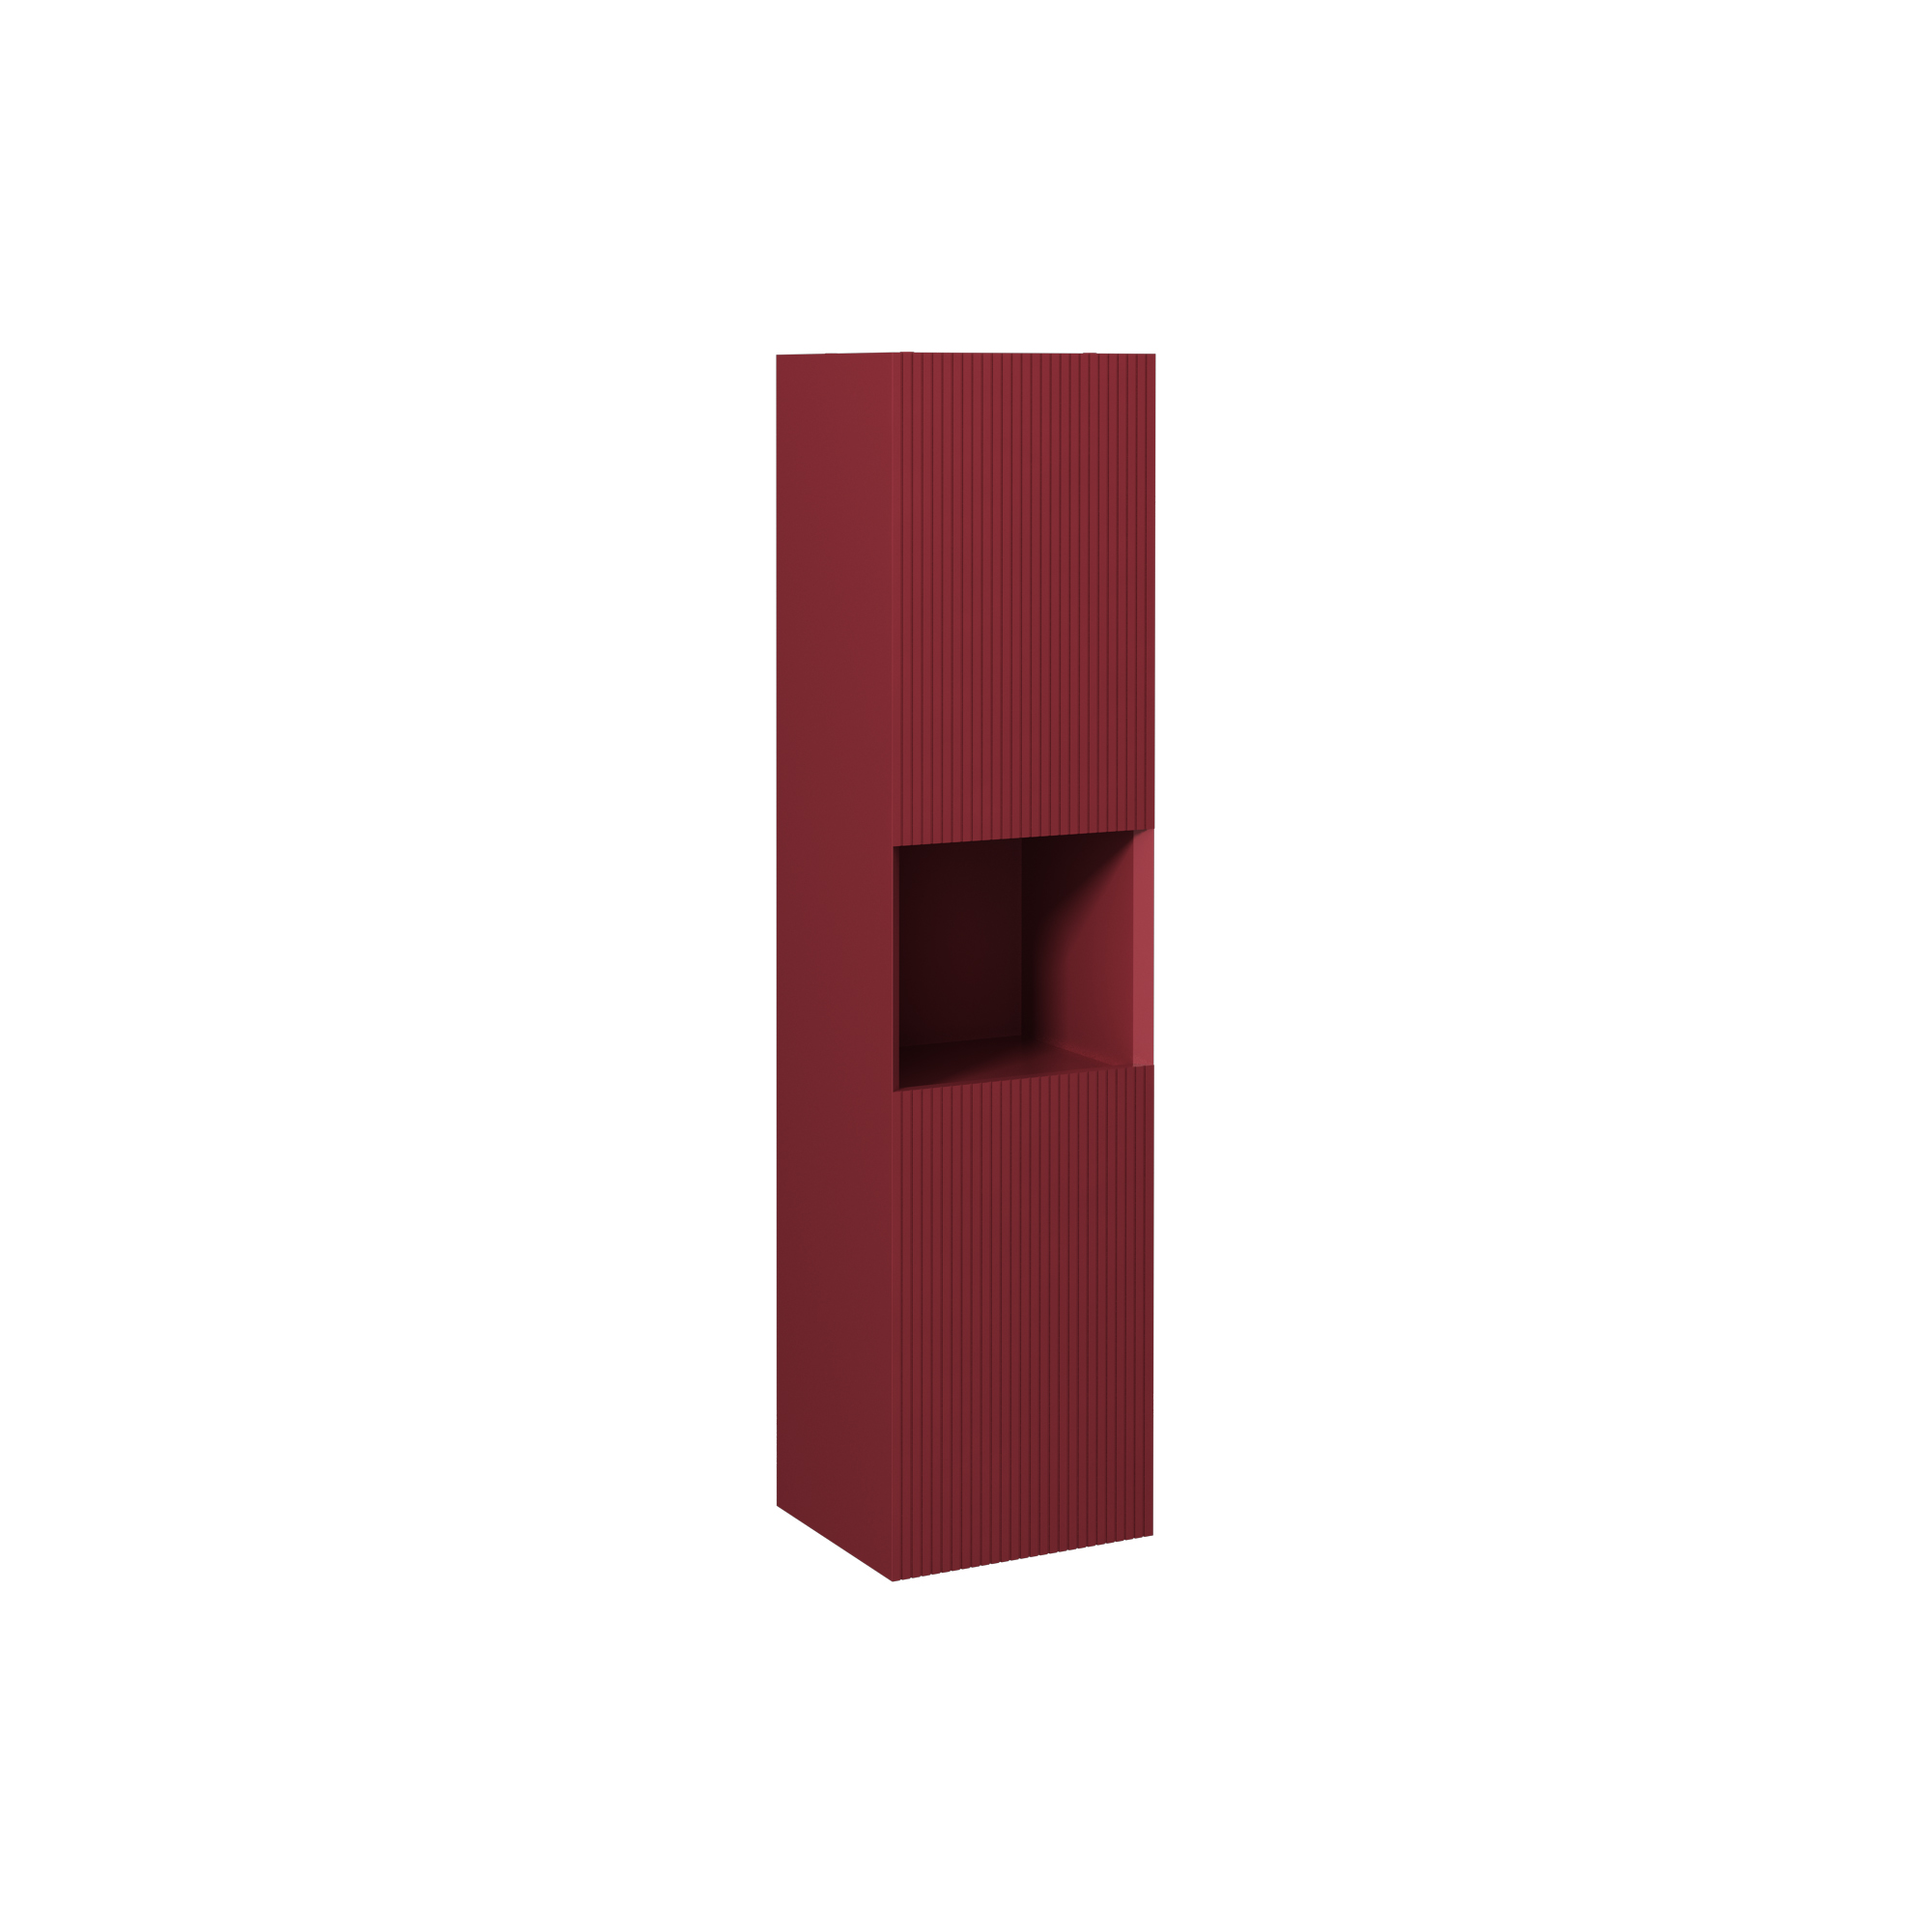 Infinity Tall Cabinet, Ruby Red Left 14"